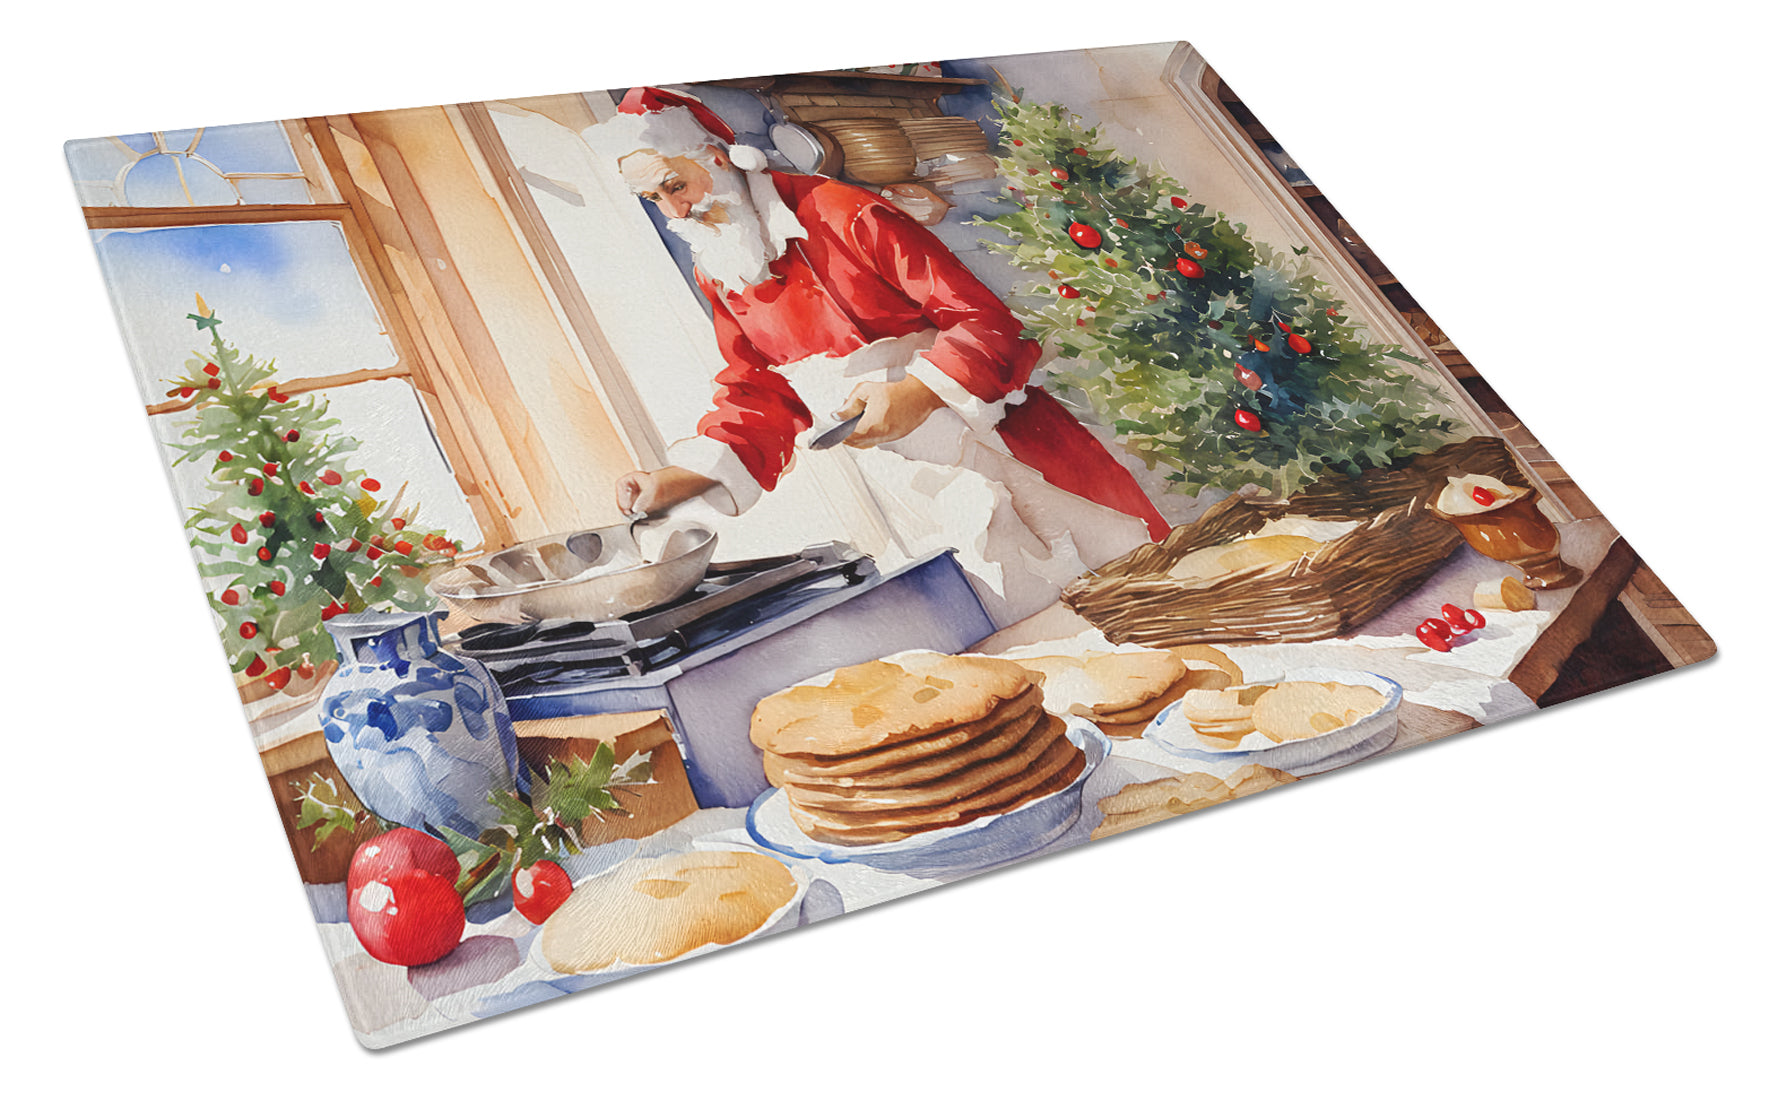 Buy this Cookies with Santa Claus Babbo Natale Glass Cutting Board Large